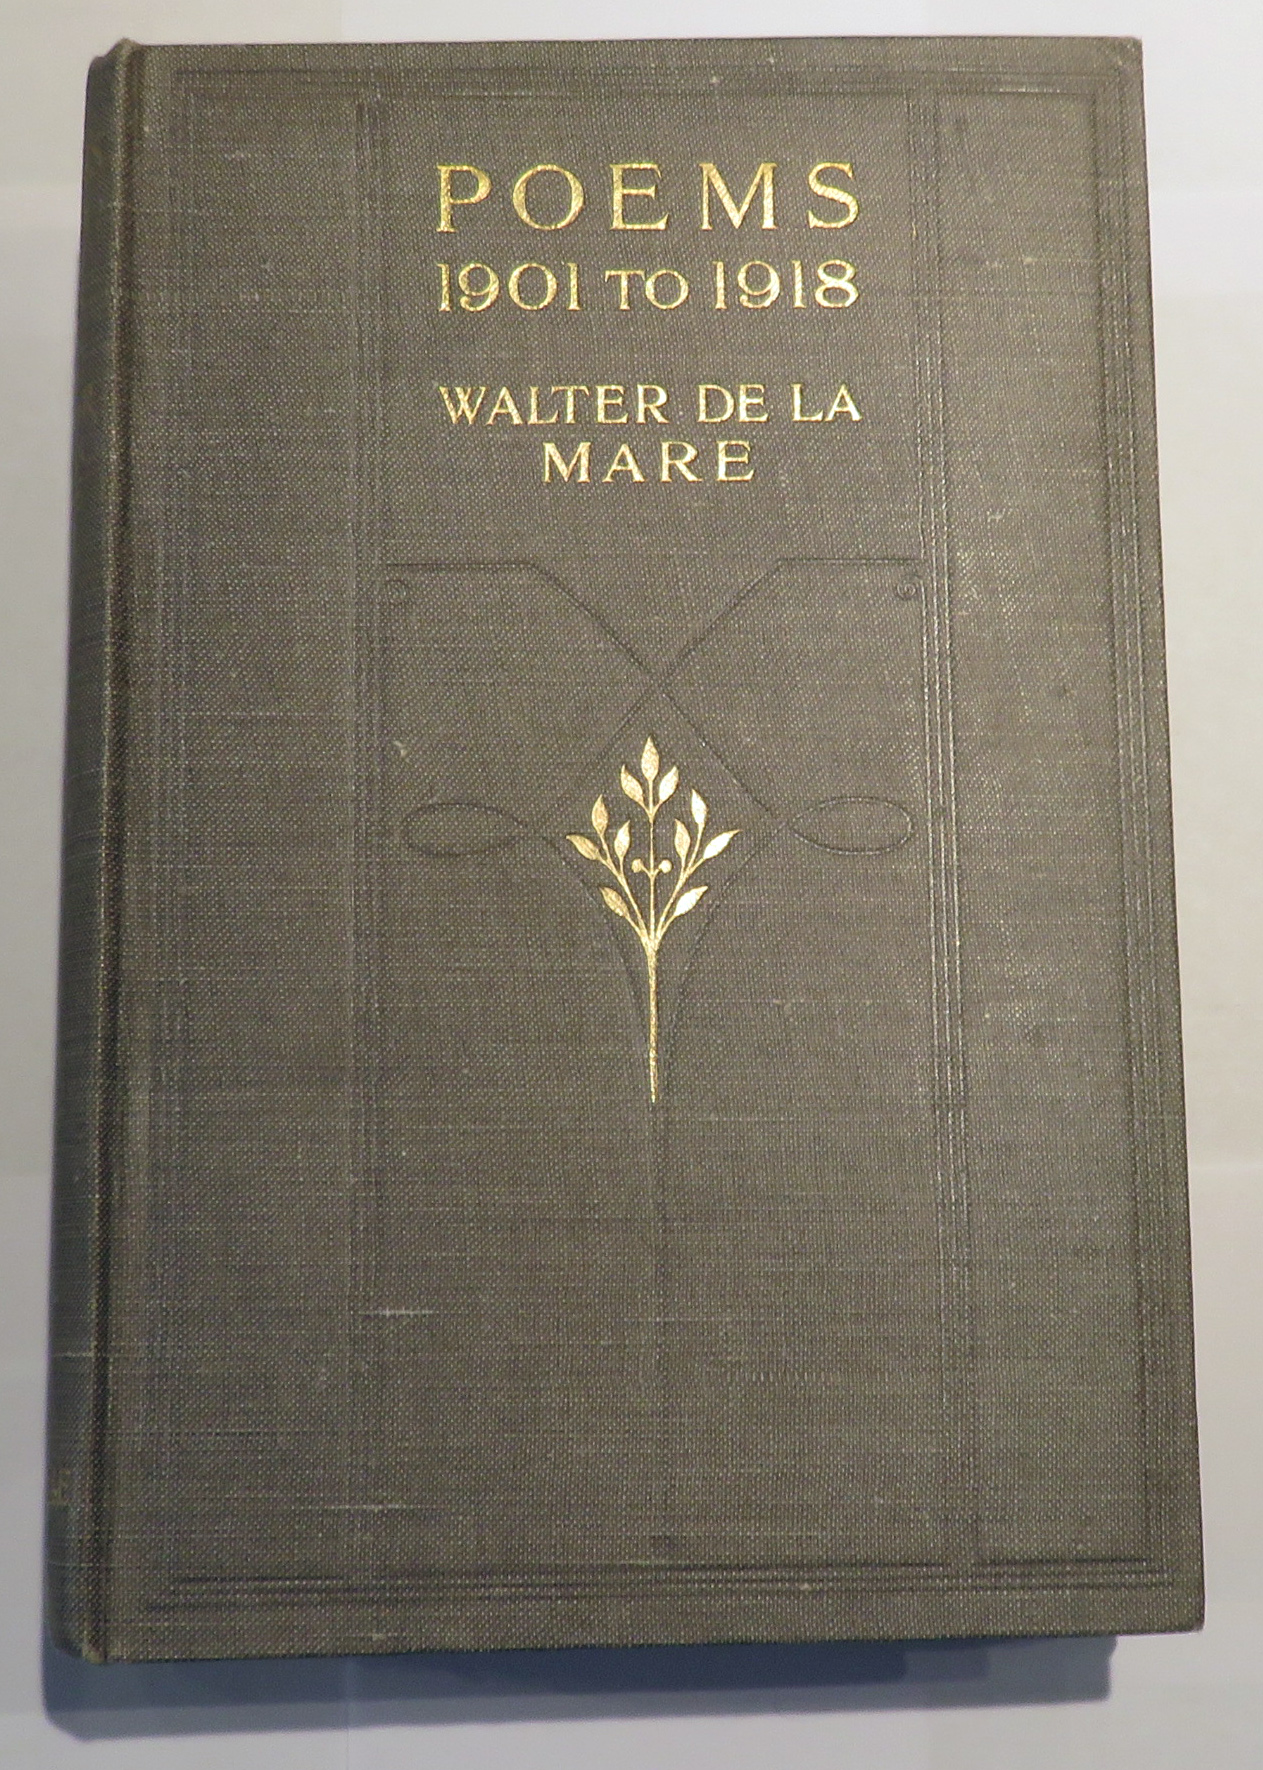 Poems 1901 To 1918 in two volumes